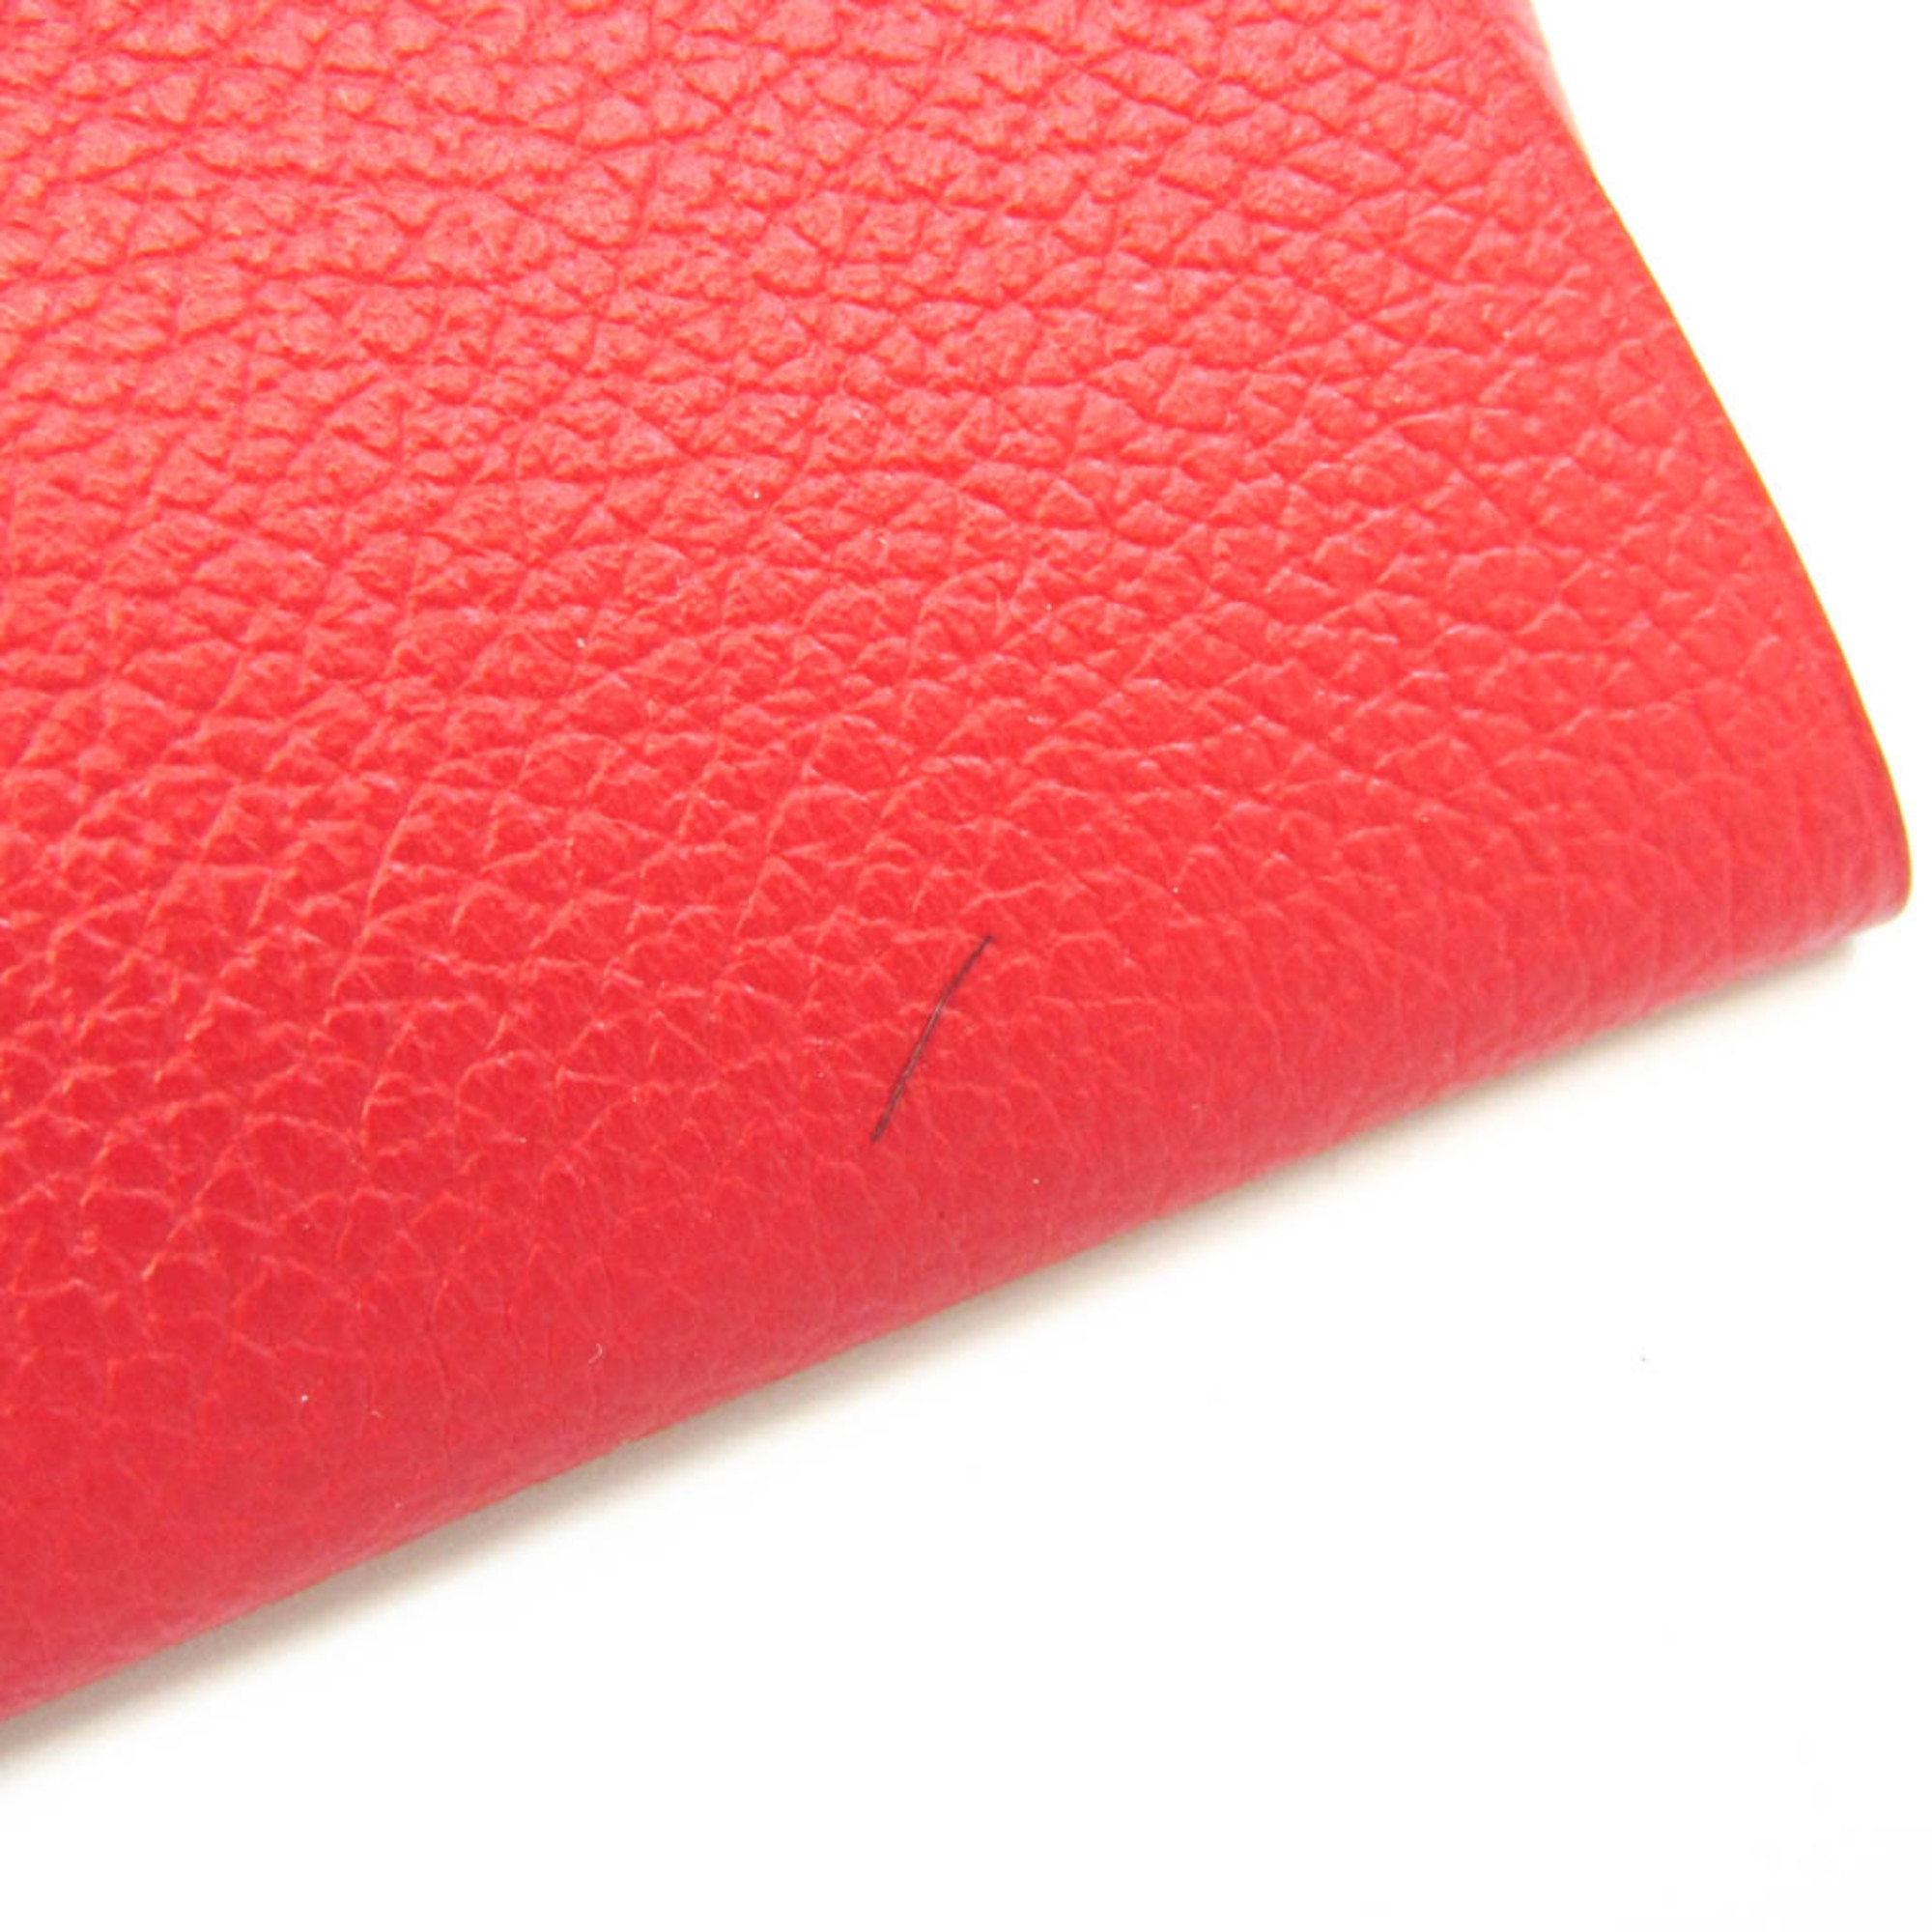 Hermes Bastia Women's Leather Coin Purse/coin Case Red Color